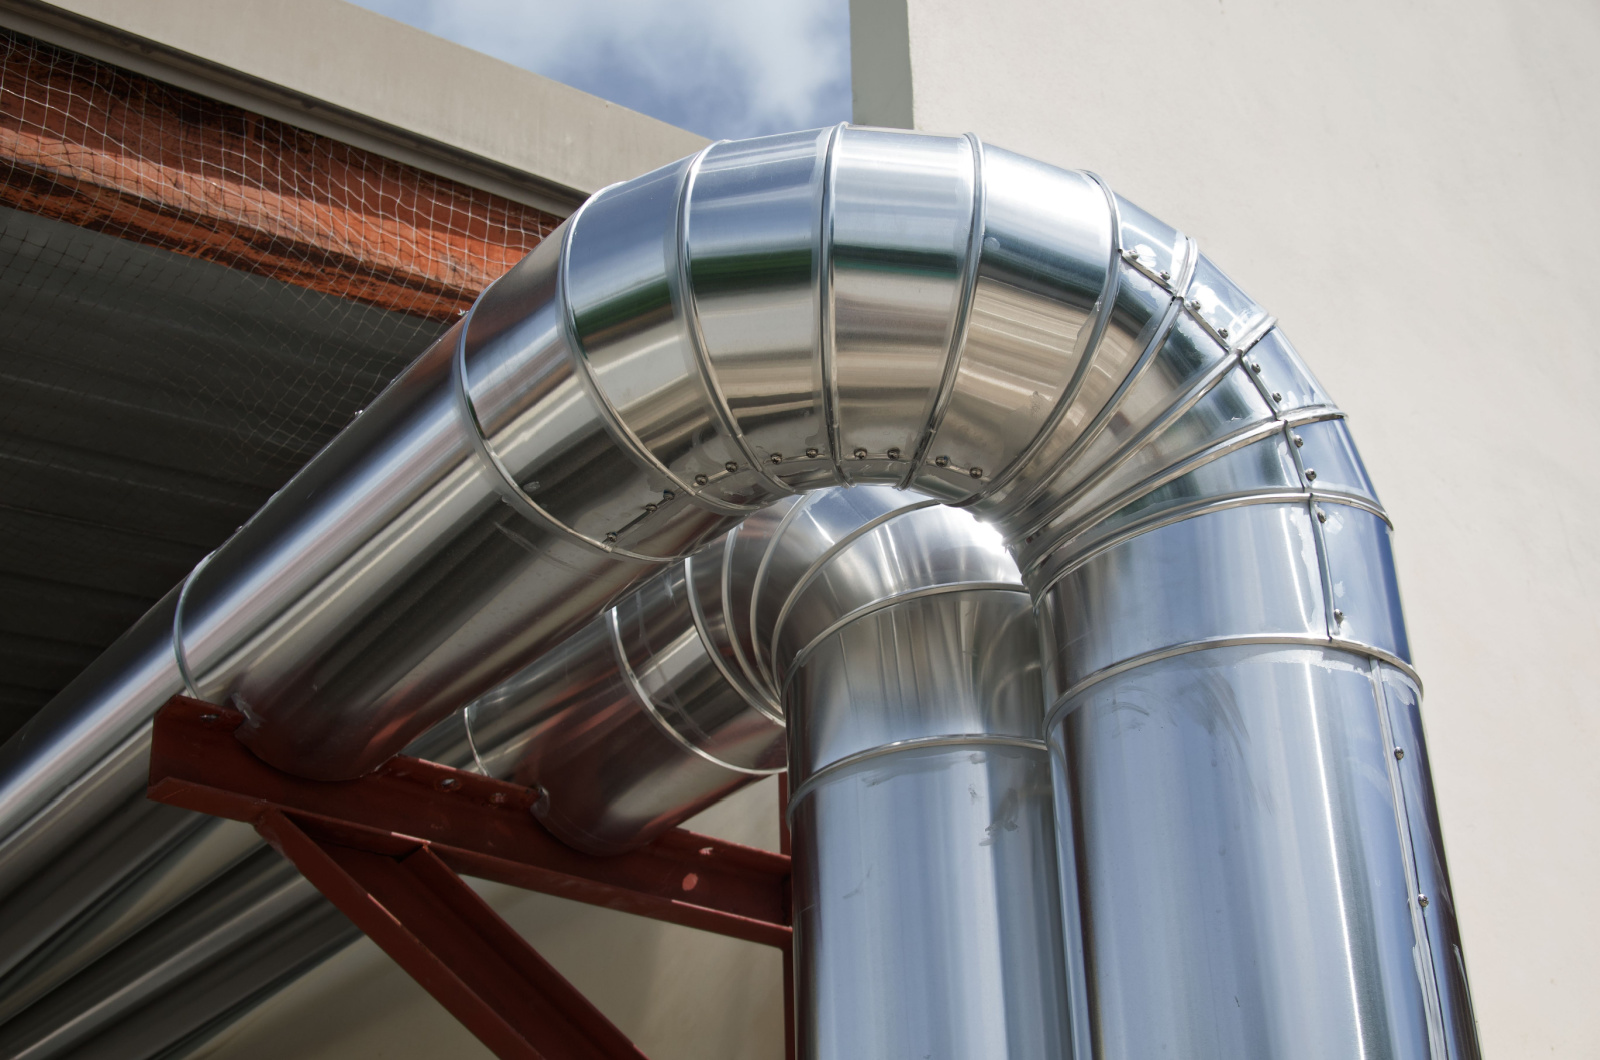 Insulated chilled water pipes and covered with aluminum sheets